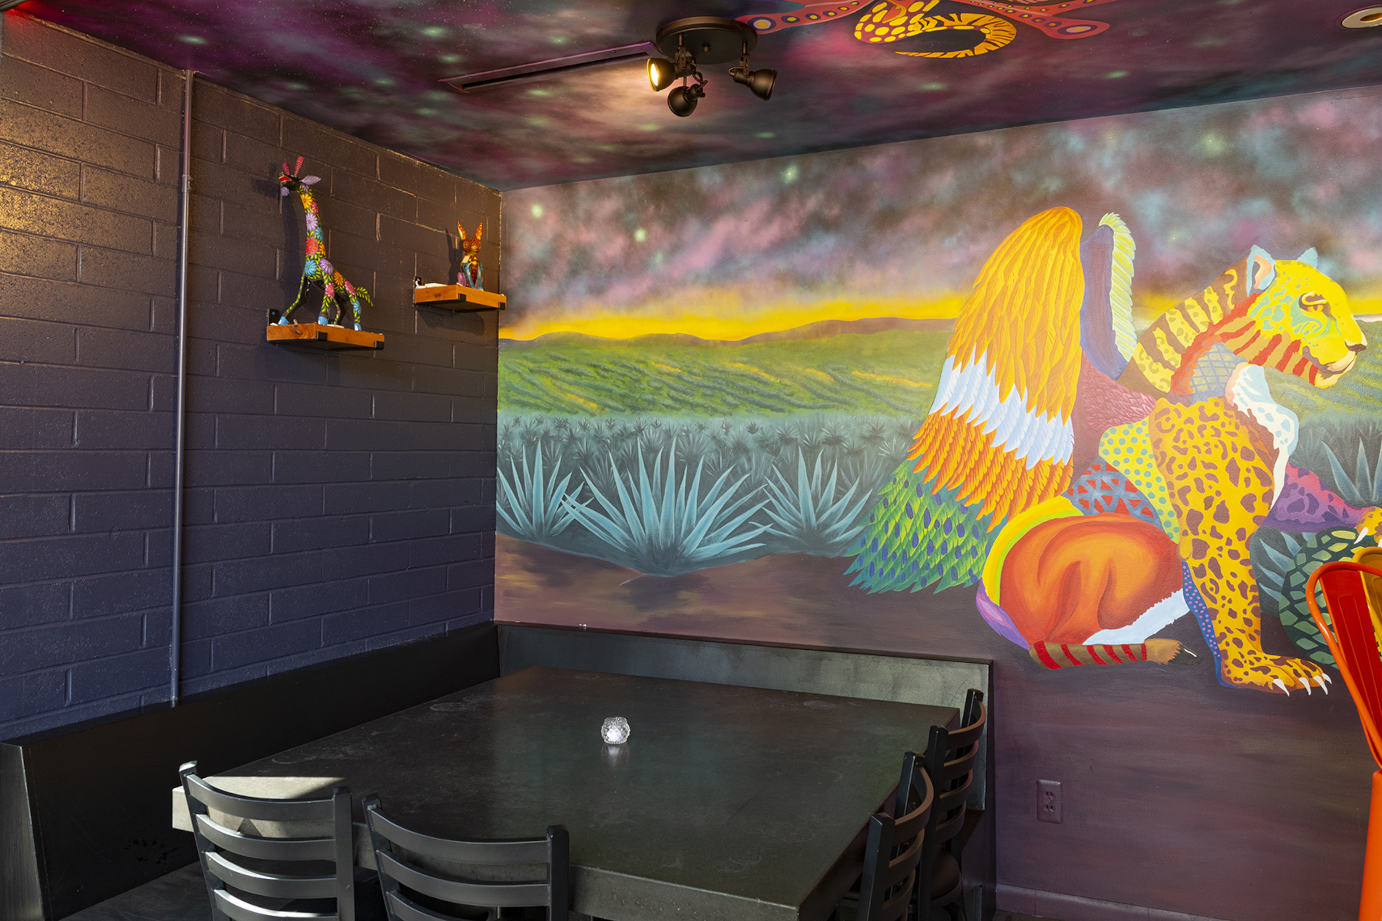 Table and seats by a wall decorated with colorful mural